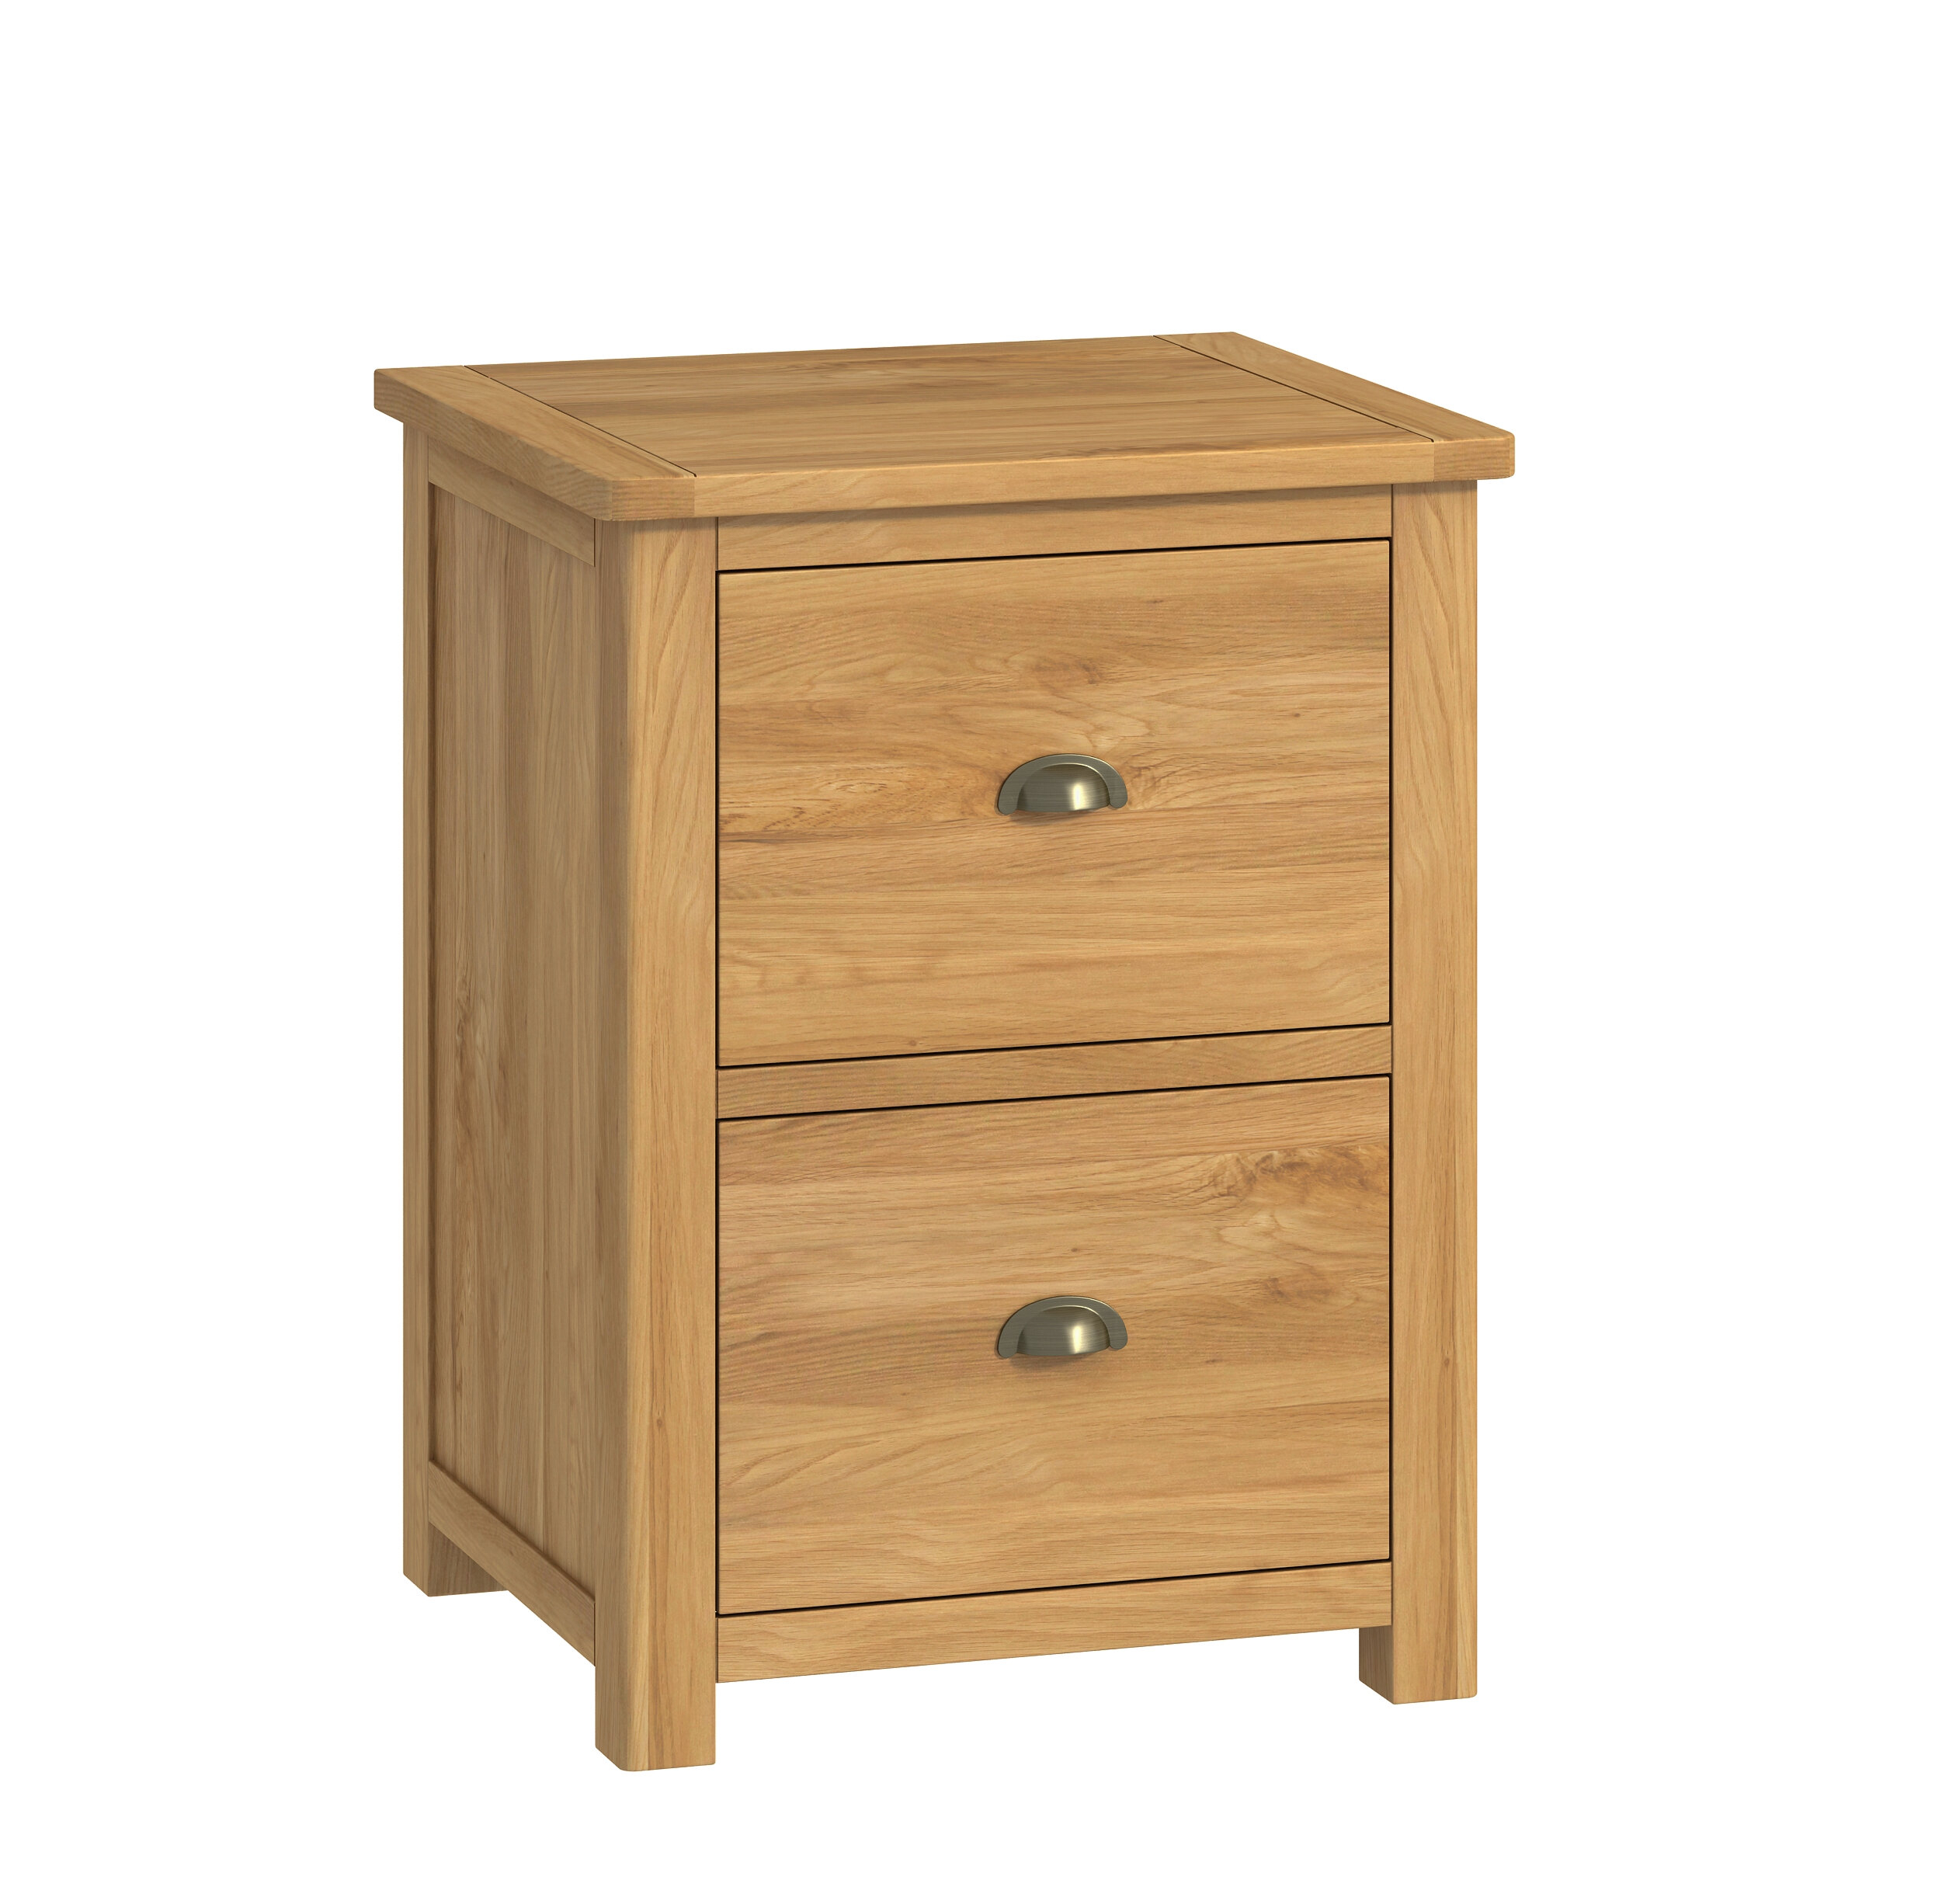 Beachcrest Home Harris 2 Drawer Filing Cabinet Wayfaircouk intended for sizing 2510 X 2452